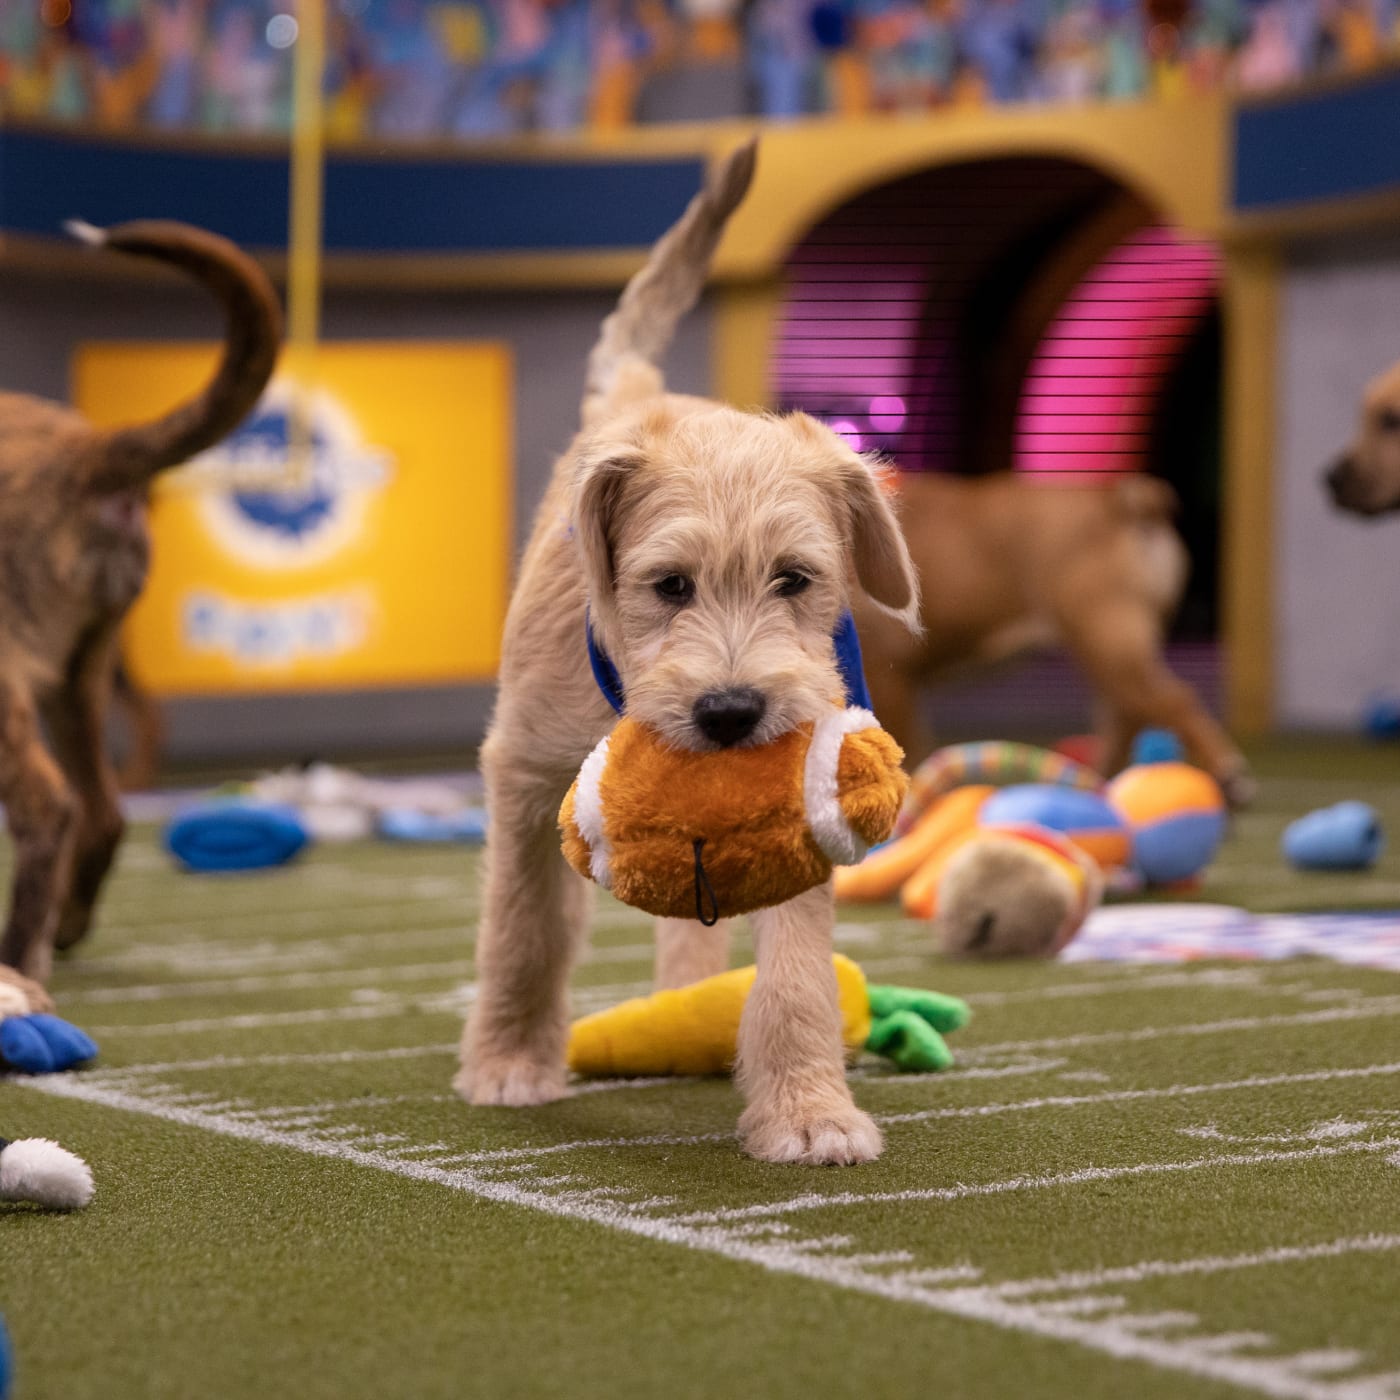 Puppy Bowl Watch Full Episodes & More! Animal